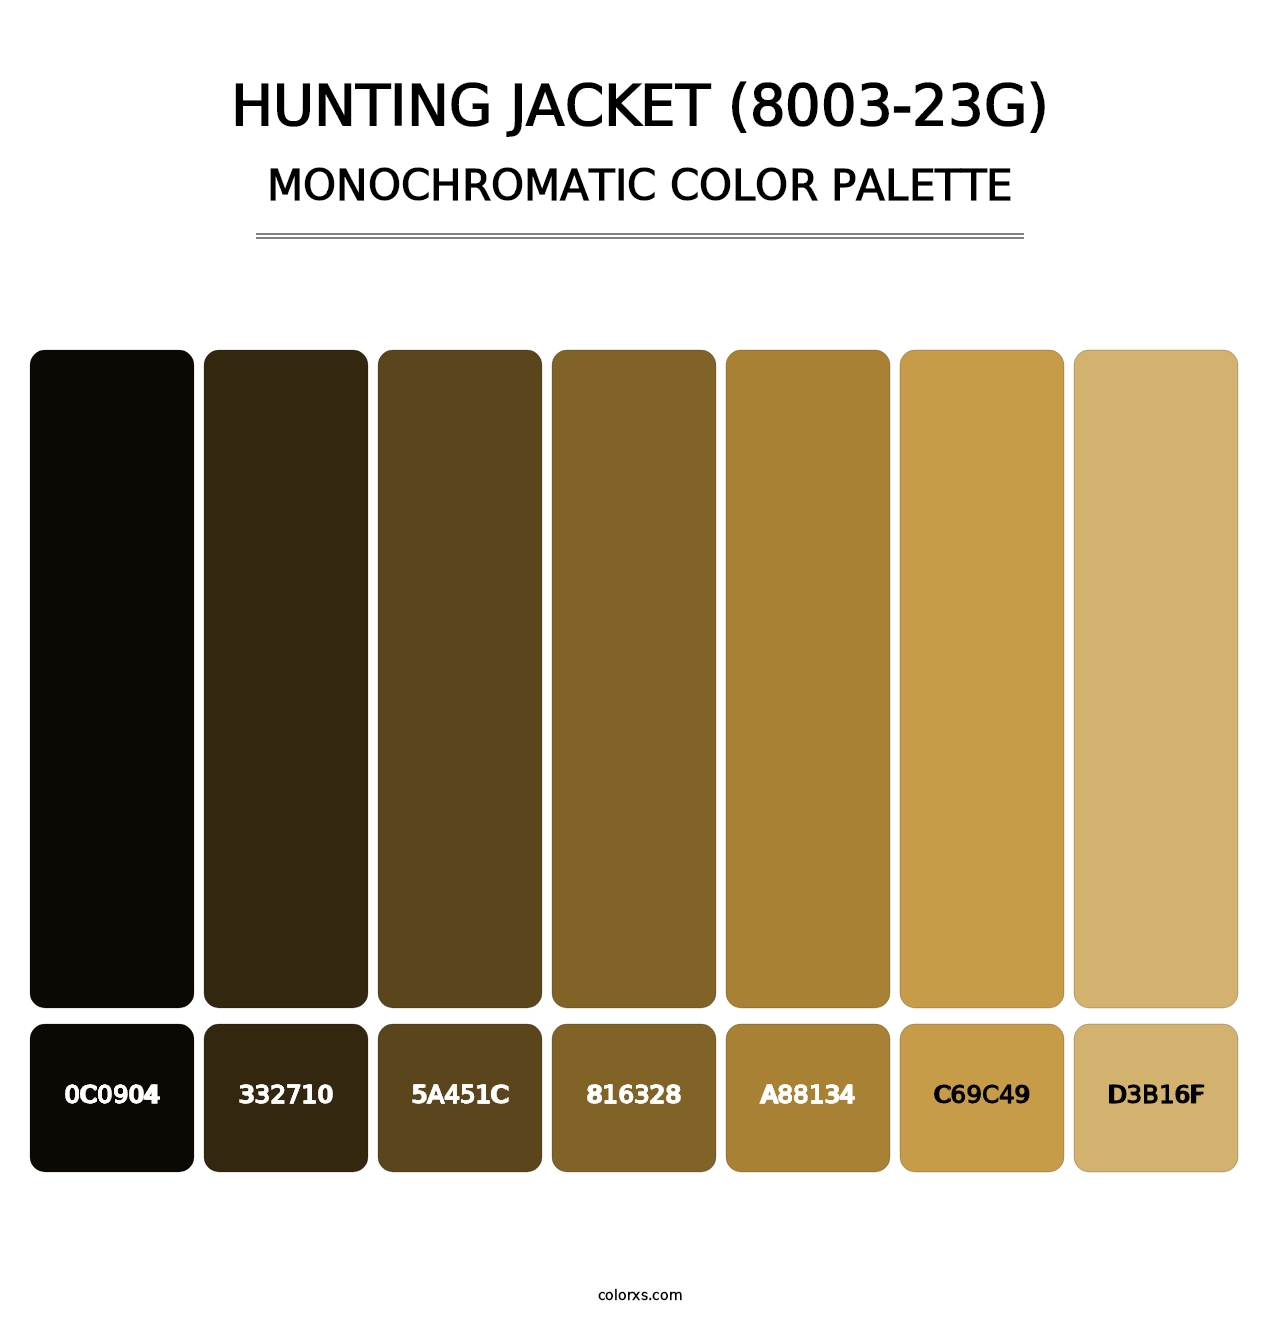 Hunting Jacket (8003-23G) - Monochromatic Color Palette